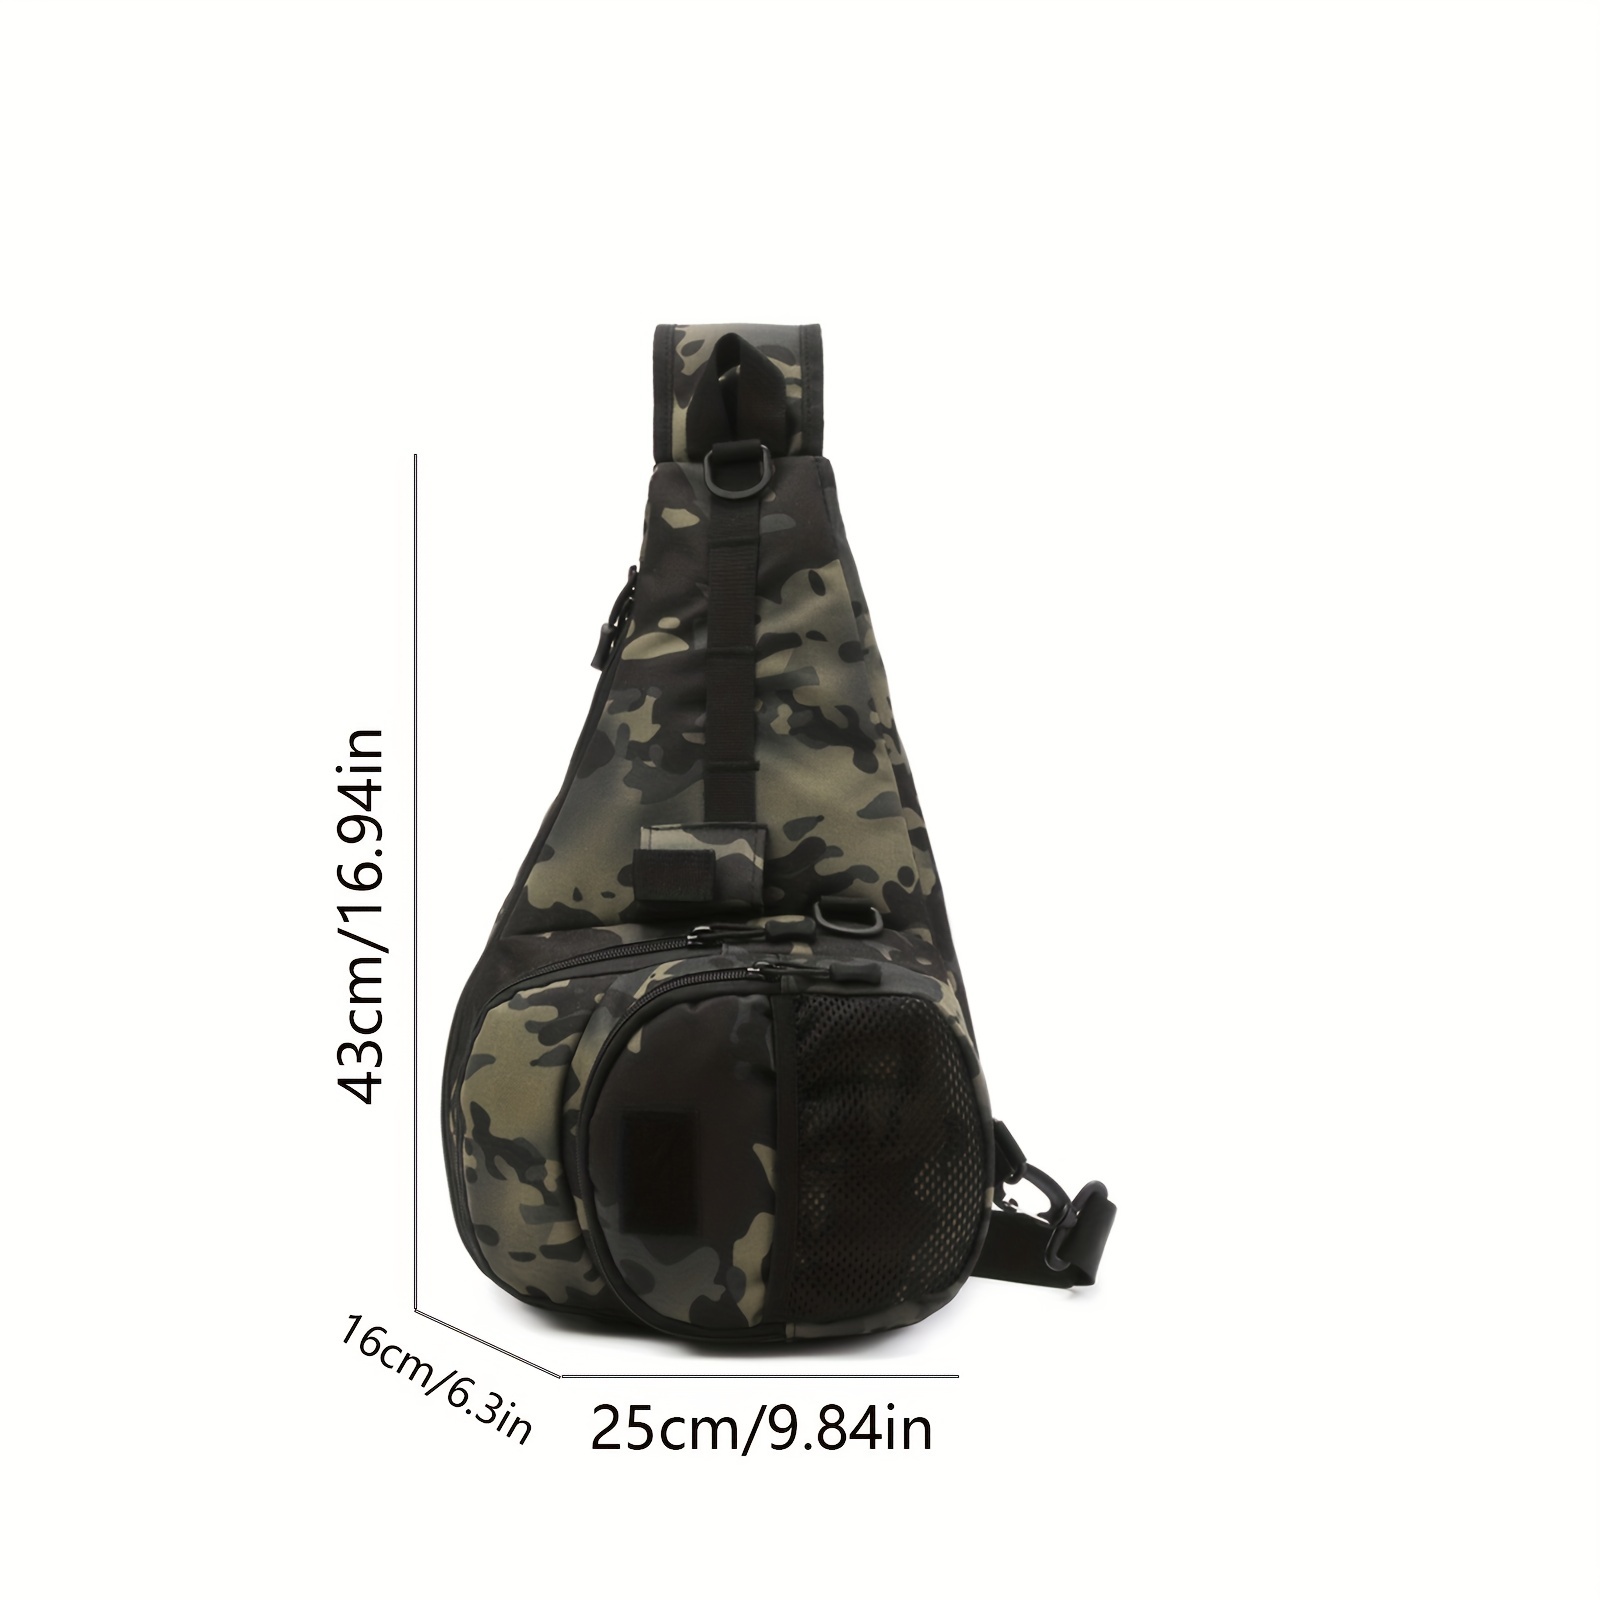 Reaction Tackle Fishing Tackle Bag - Water Resistant Camo Tackle Bag with  Padded Shoulder Strap, D Ring Hanger, Suitable for 3600 Tackle Boxes